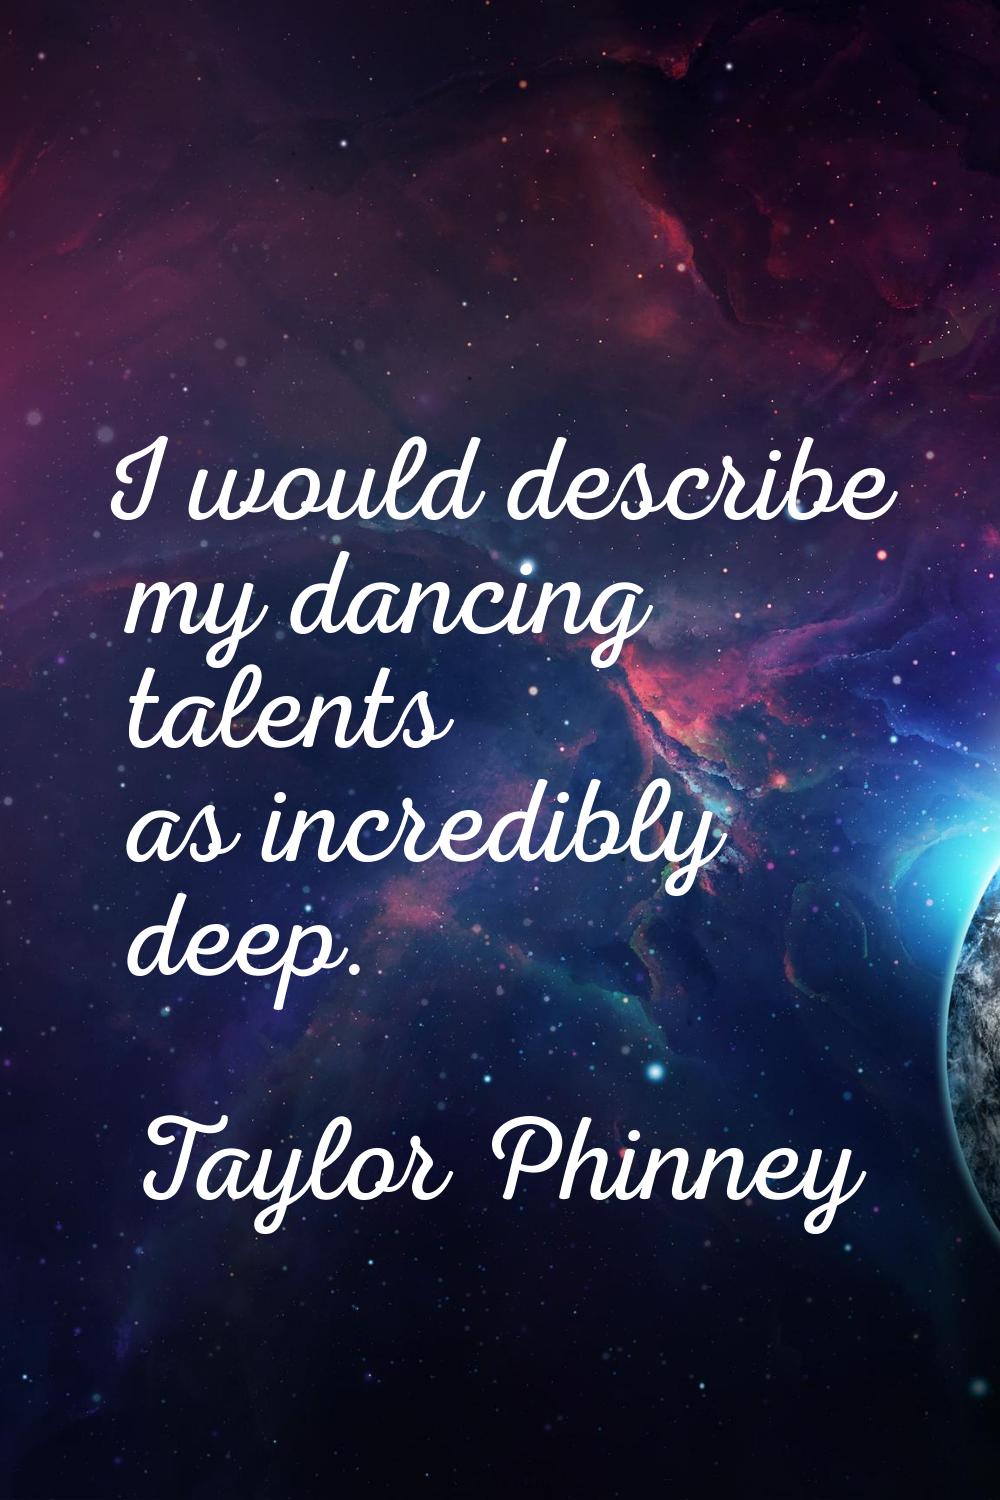 I would describe my dancing talents as incredibly deep.